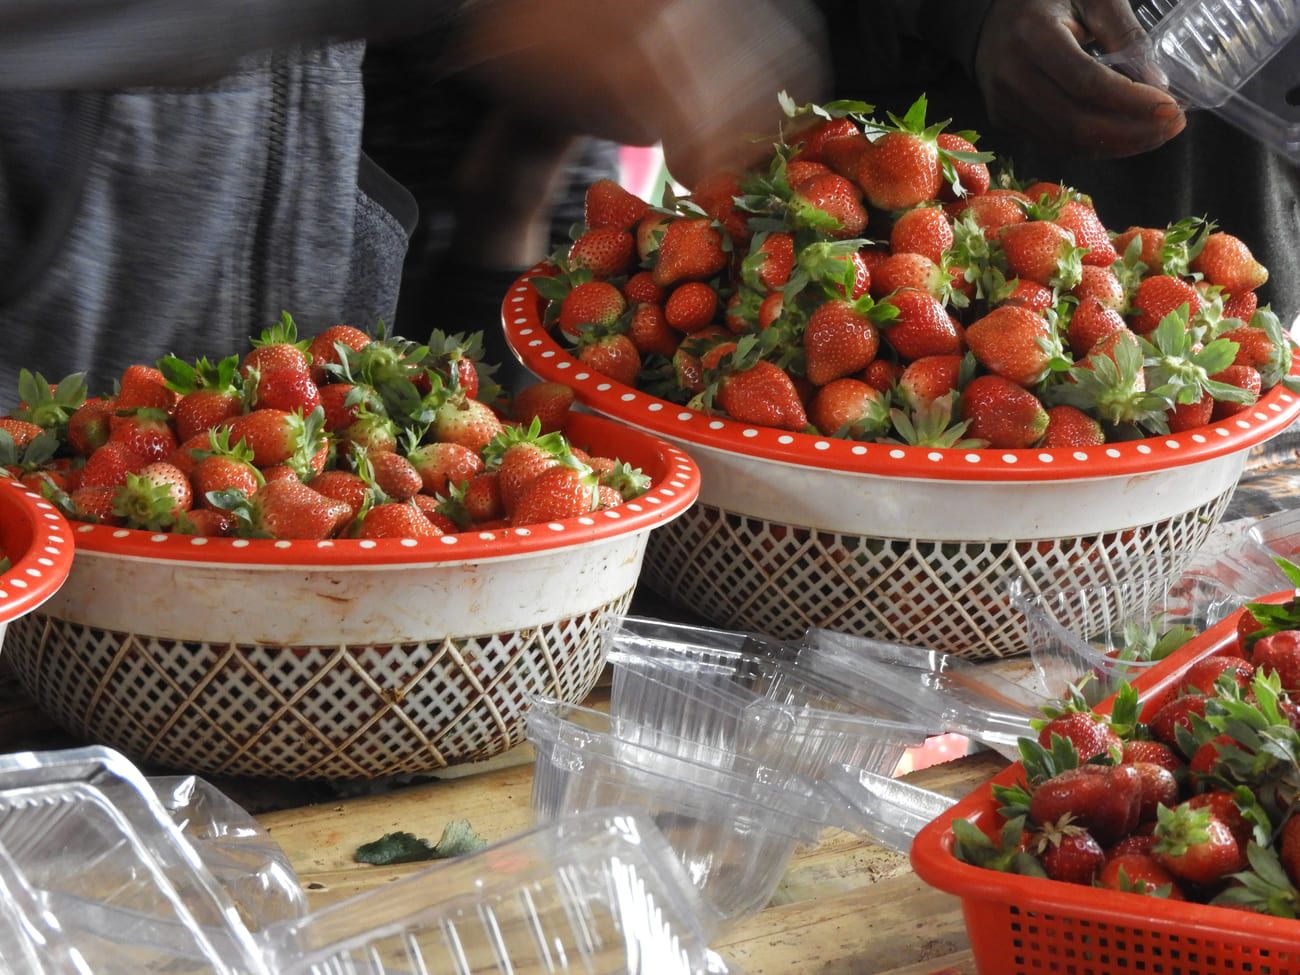 Buckets of fresh strawberries, fragaria ananassa, ready to be packed and sold 